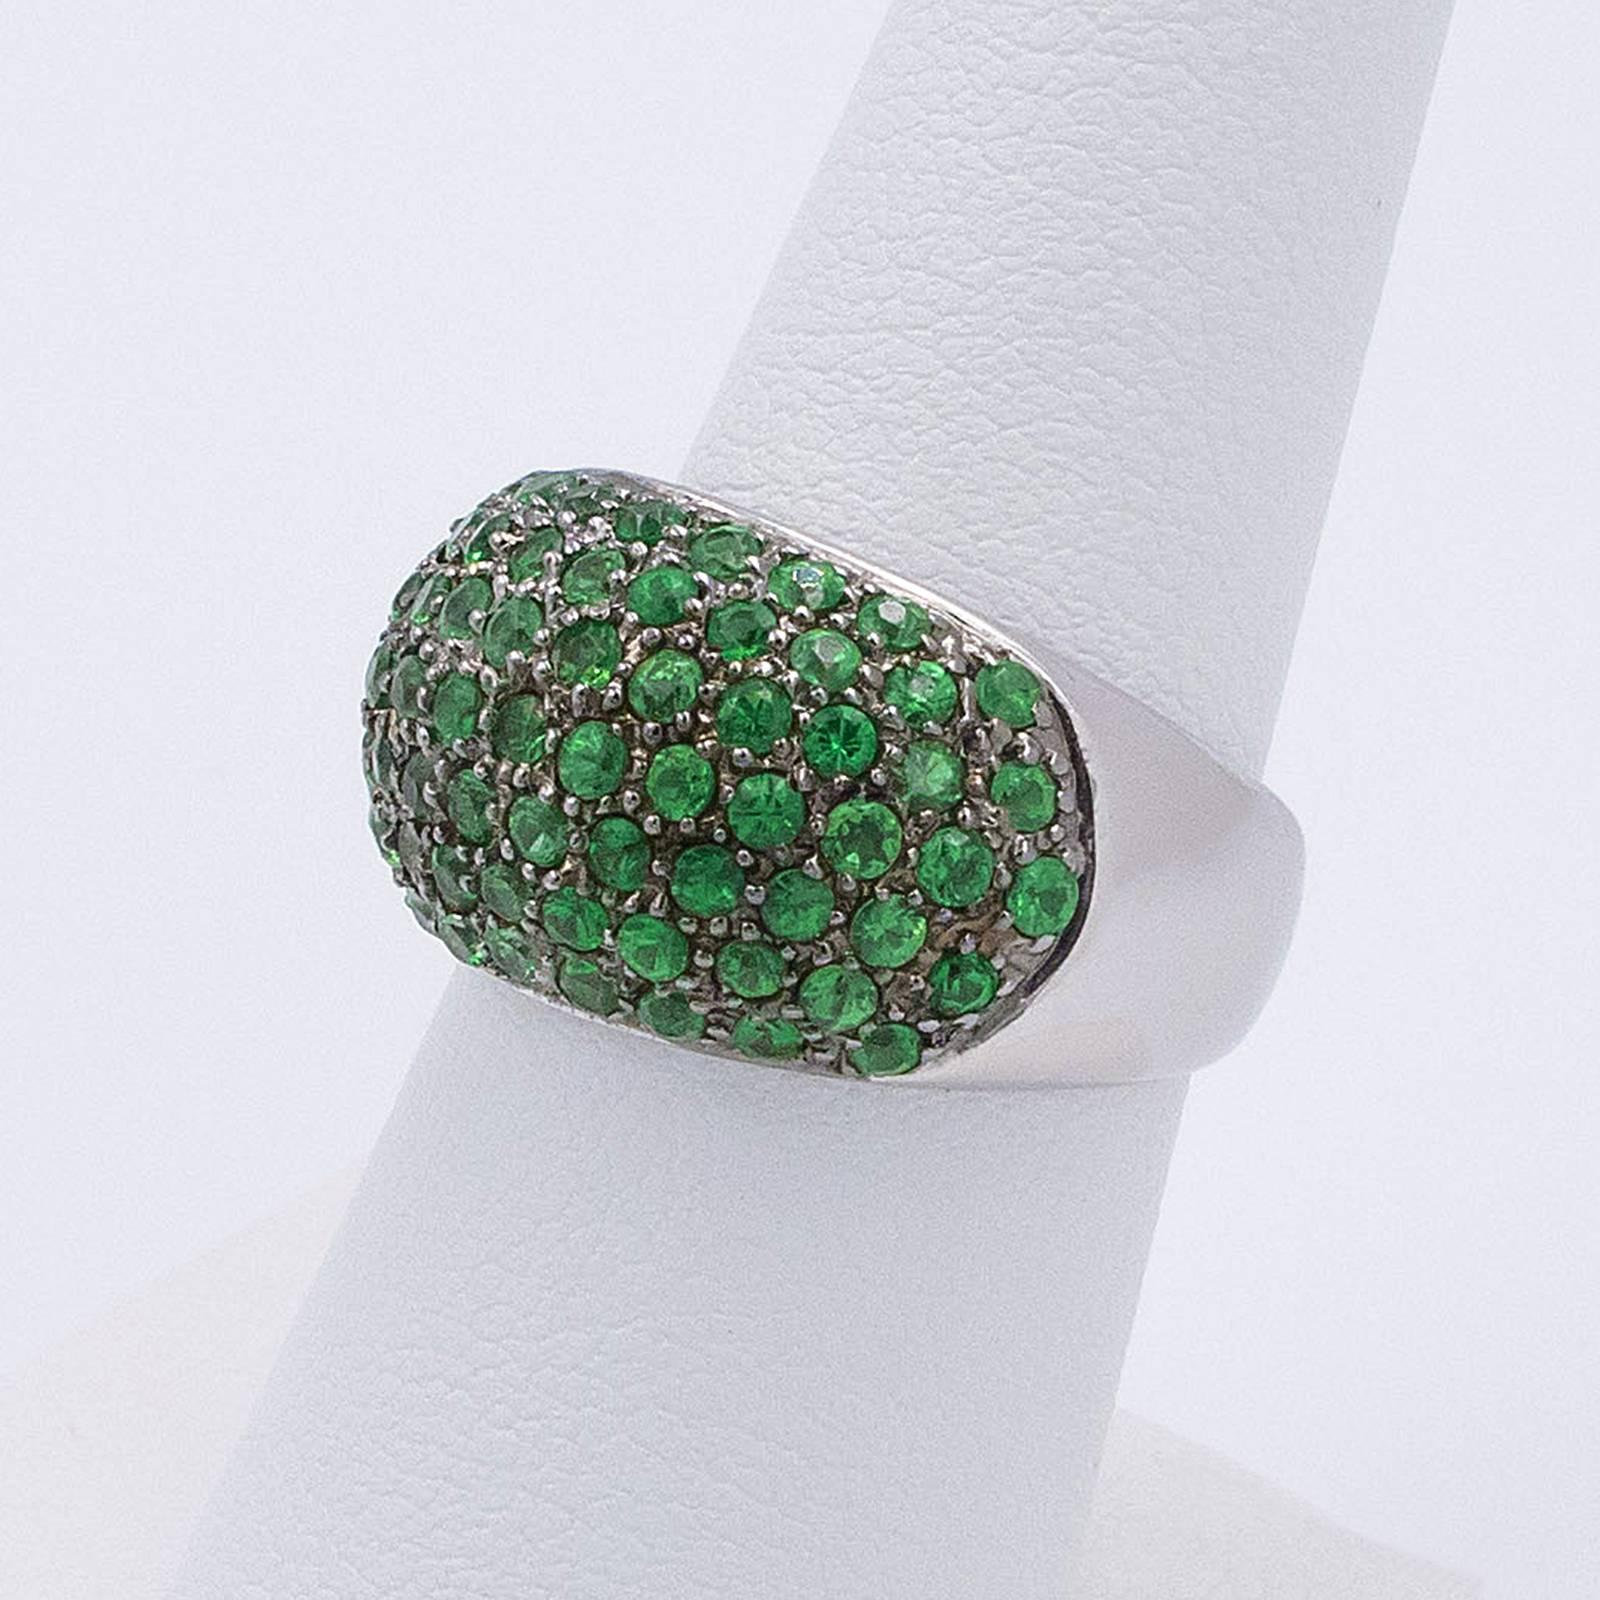 A stunning white gold band is pave set with 73 round Tsavorite Green Garnets to the domed top of the ring.

The band is 3/4 inch wide at the top and rises up 3/16 inch off the finger. Currently a size 6.5 we can custom size this up or down to suit